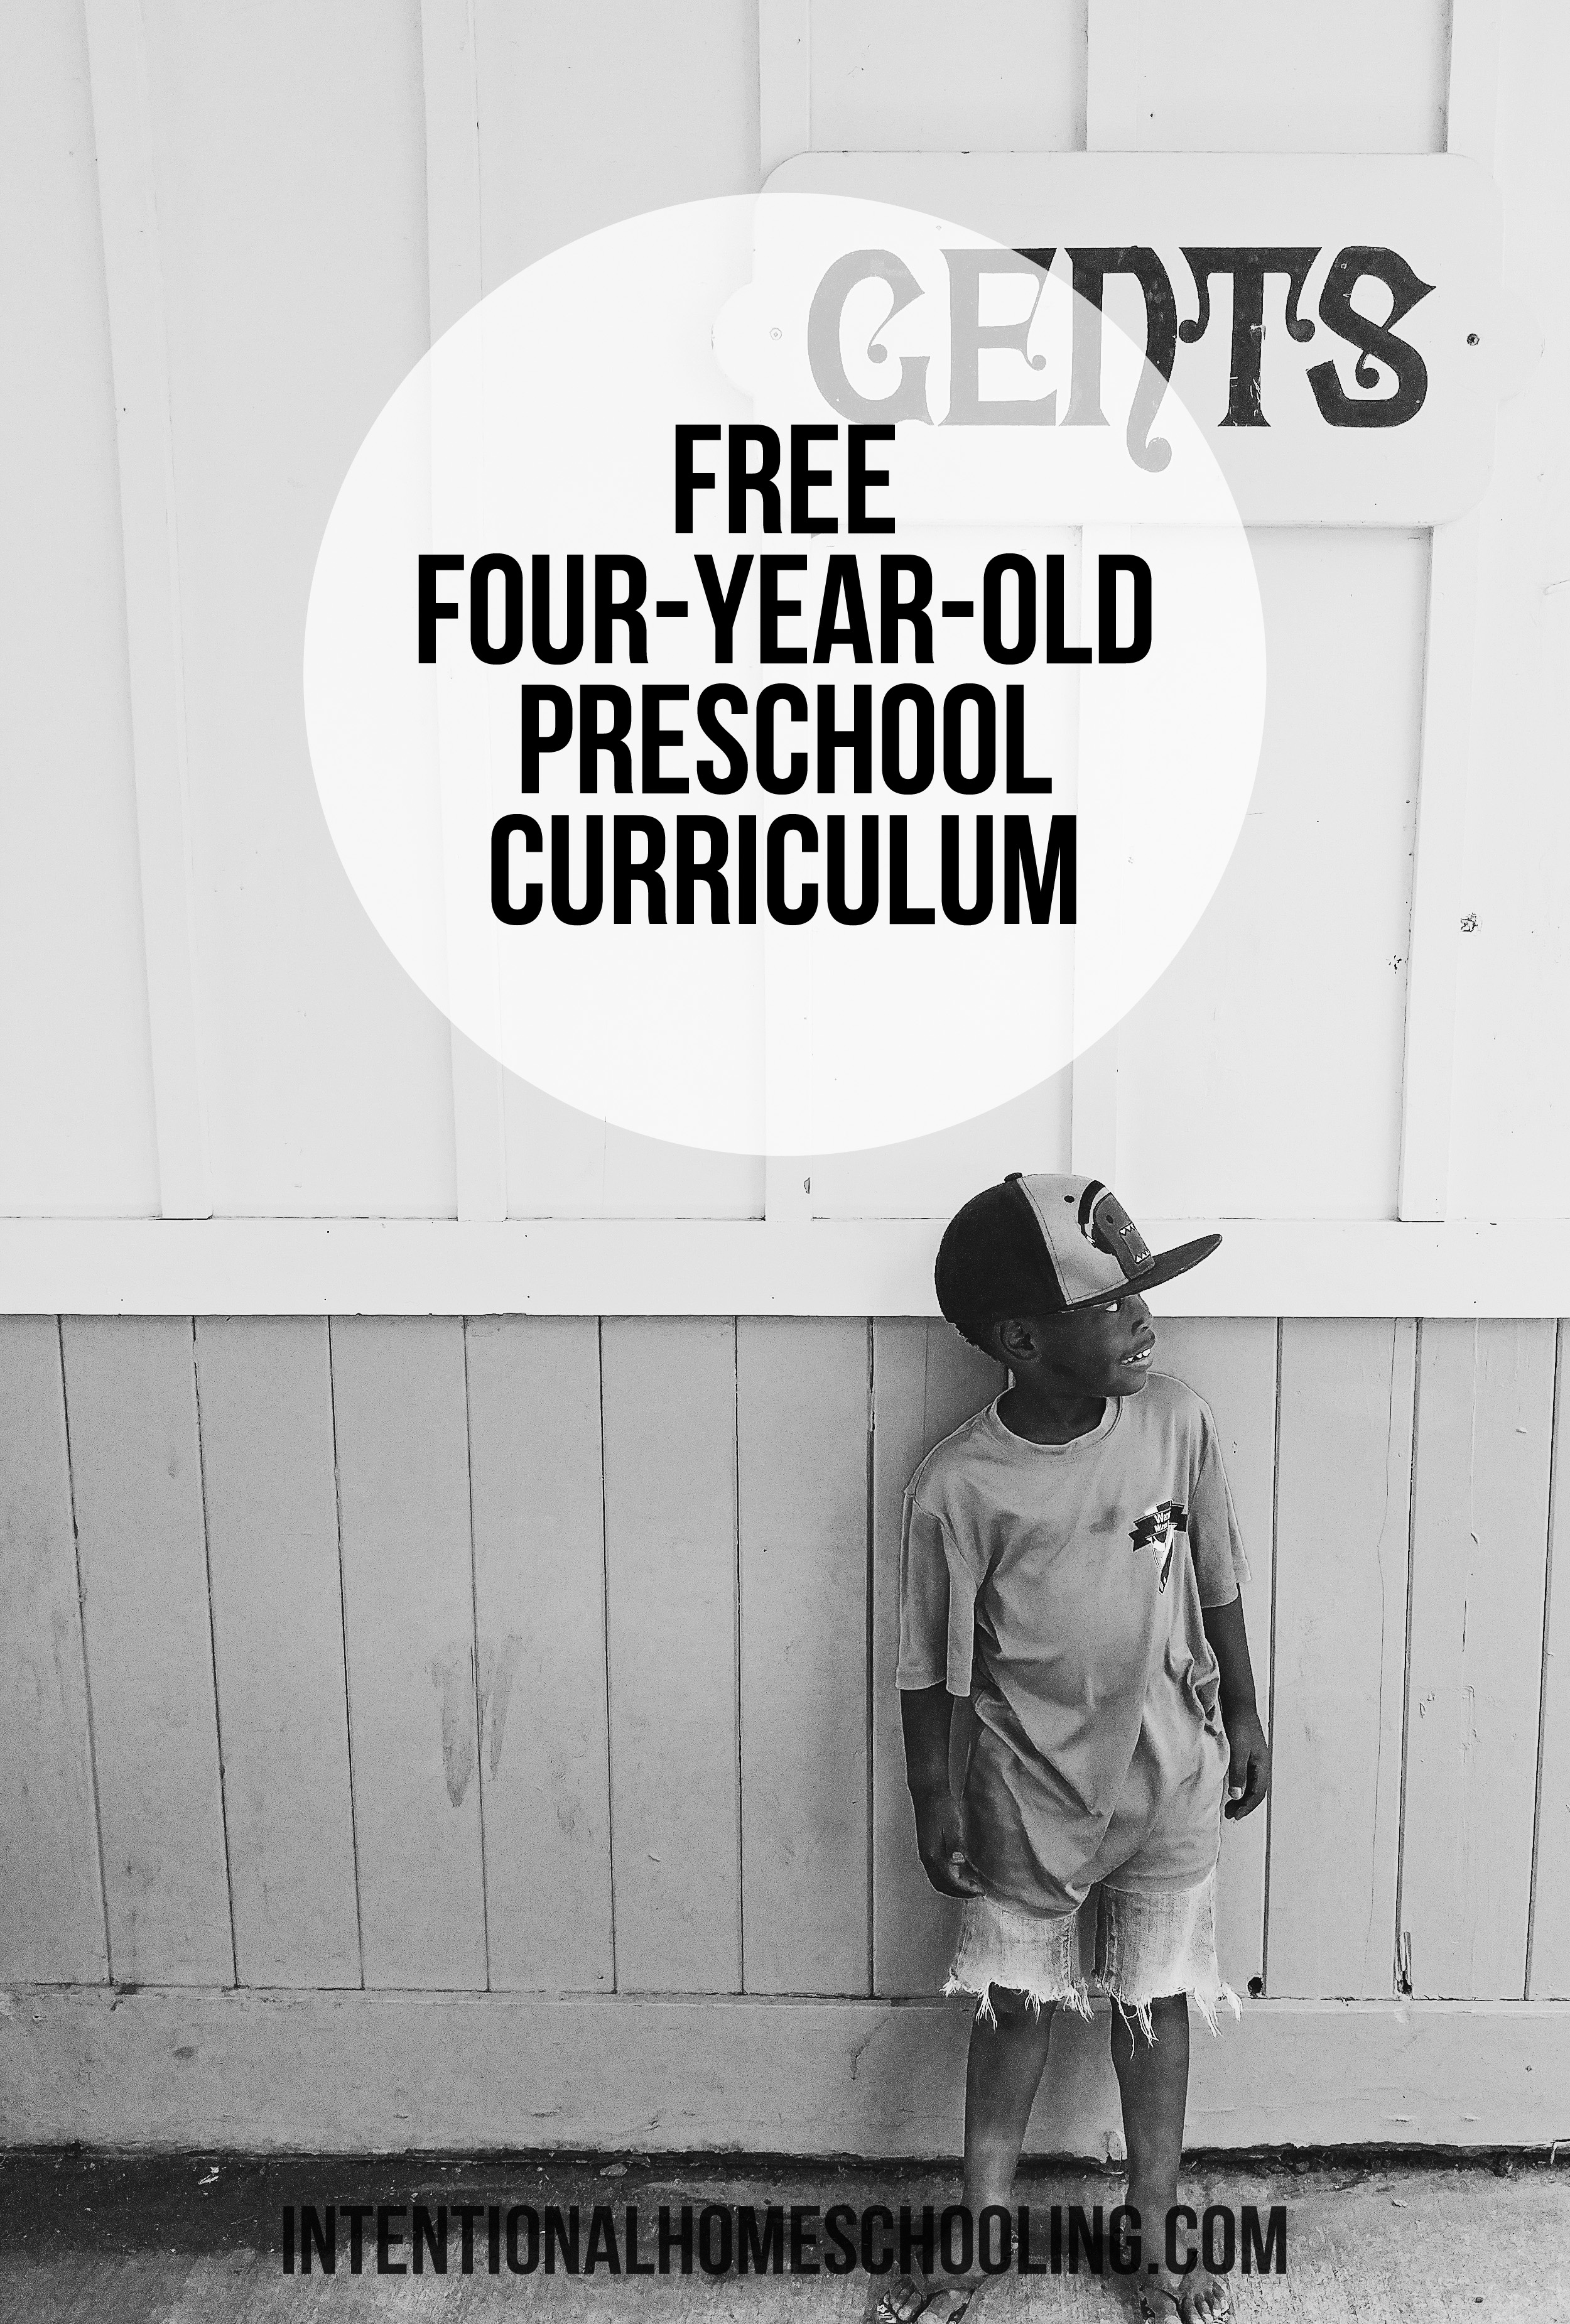 Free Weekly Curriculum for Four-Year-Olds - simple and effective!